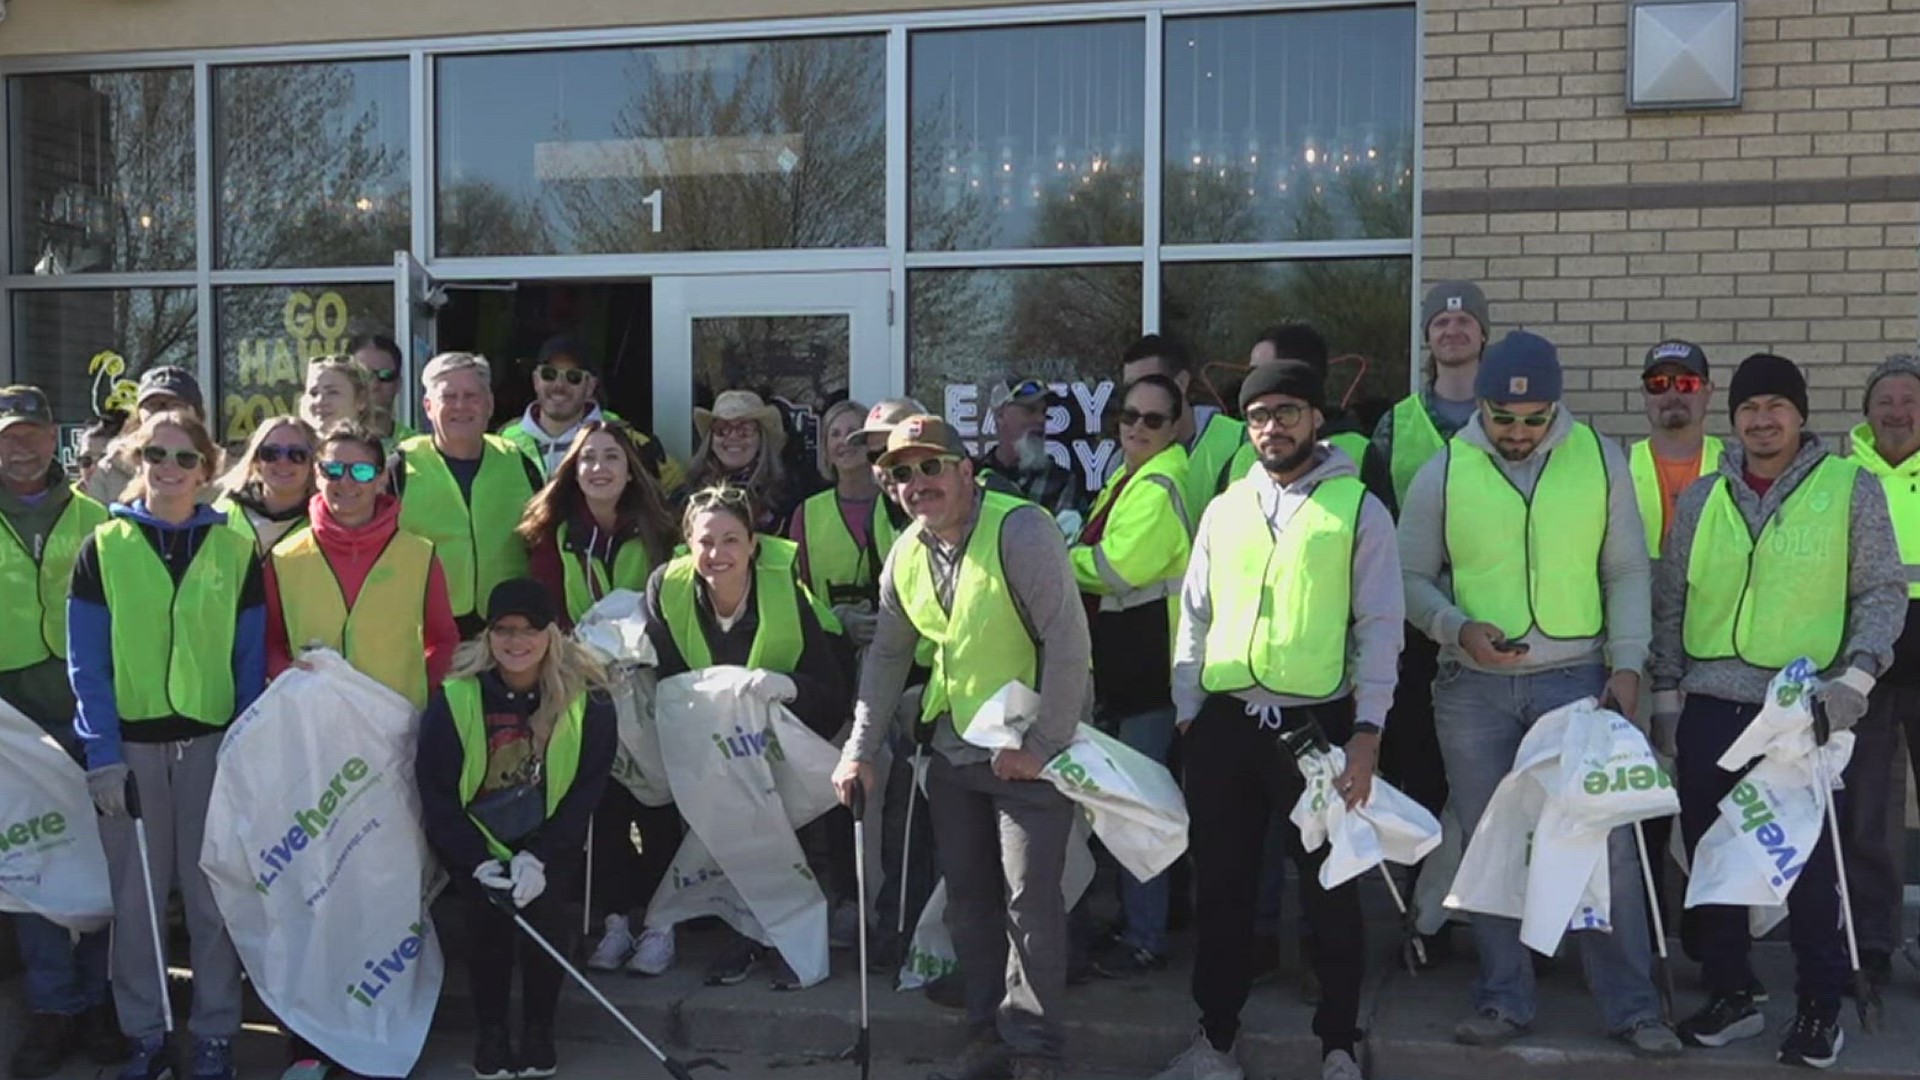 For the seventh year in a row, Public House Bar and a group of volunteers picked up trash around northwest Davenport.